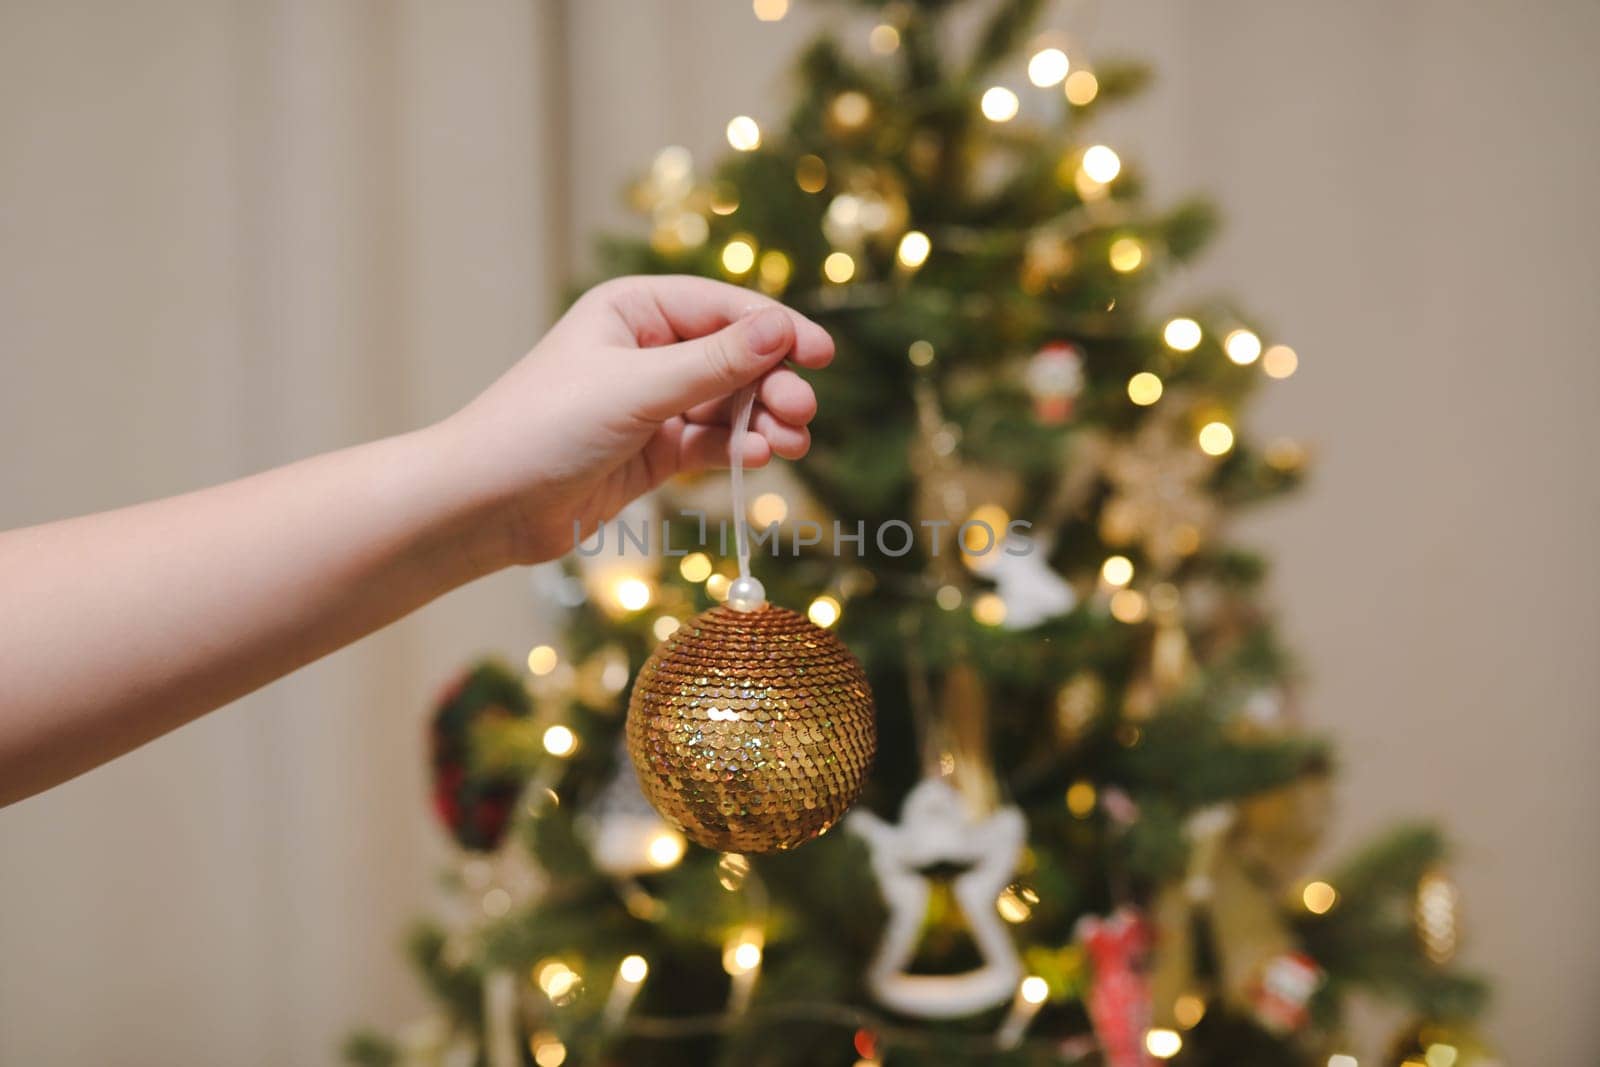 Decorating Christmas tree, holding Christmas toy in a hand. Holiday, Christmas and New Year family celebration concept by paralisart